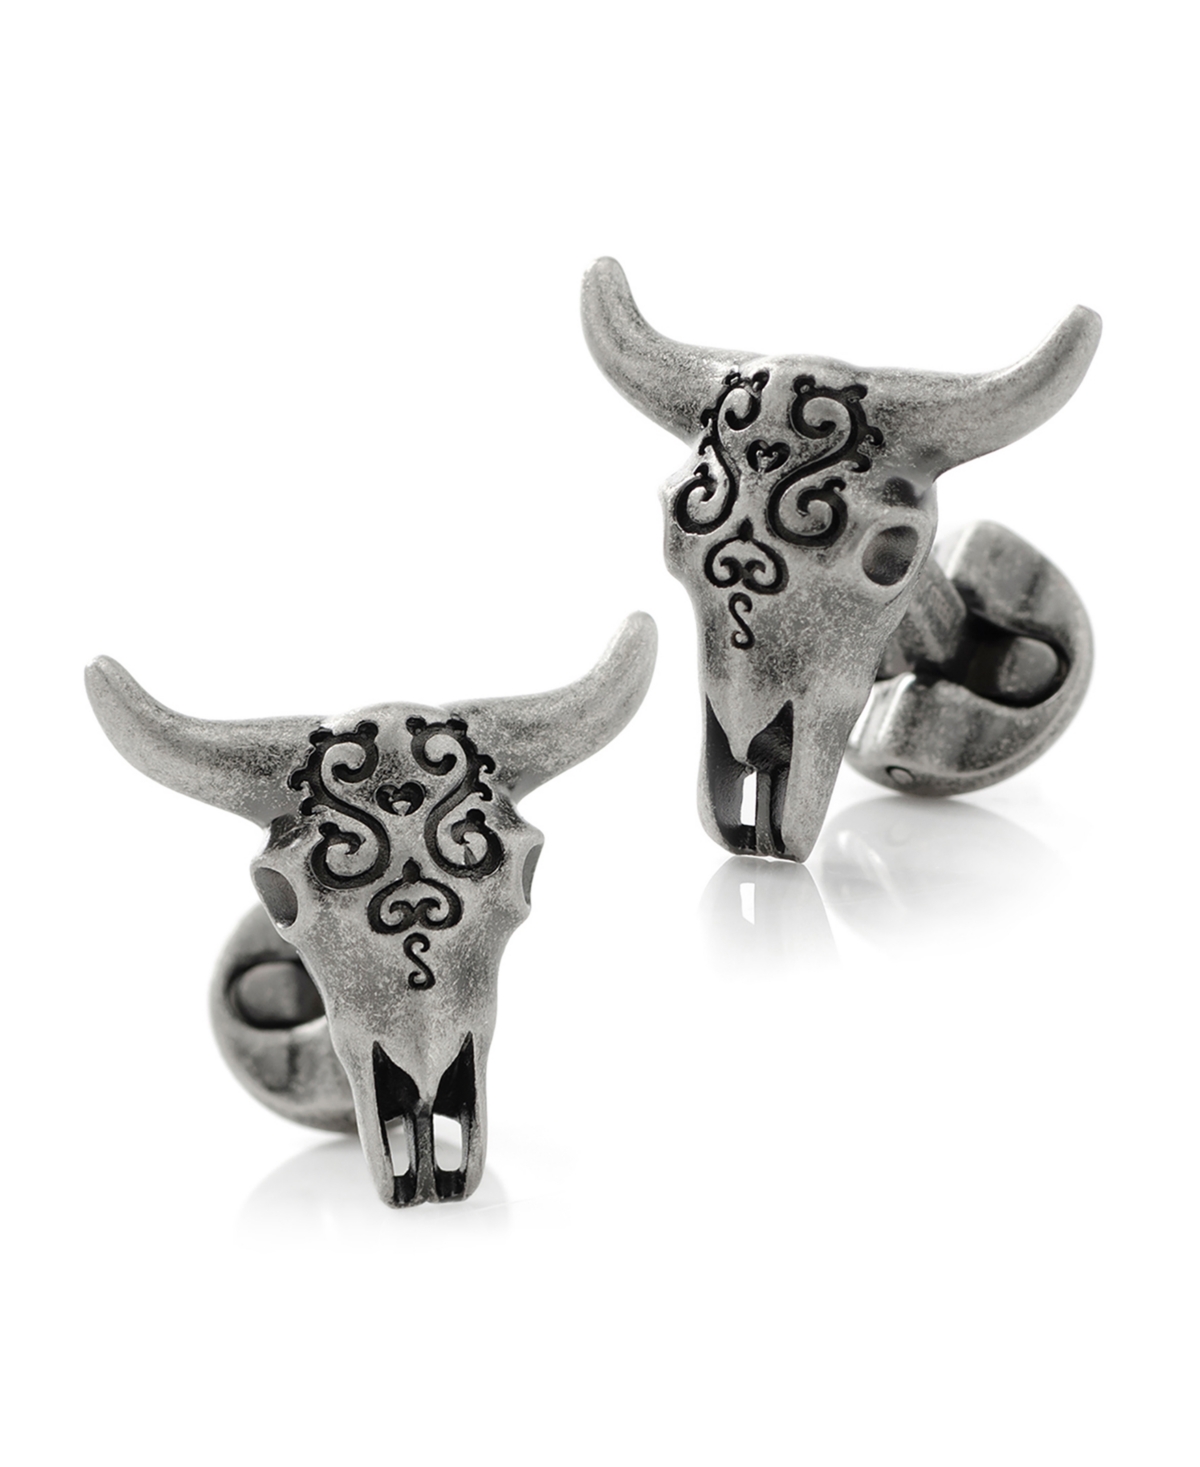 Ox & Bull Trading Co. Men's Antique-like Stainless Steel Carved Cow's Skull Cufflinks In Silver